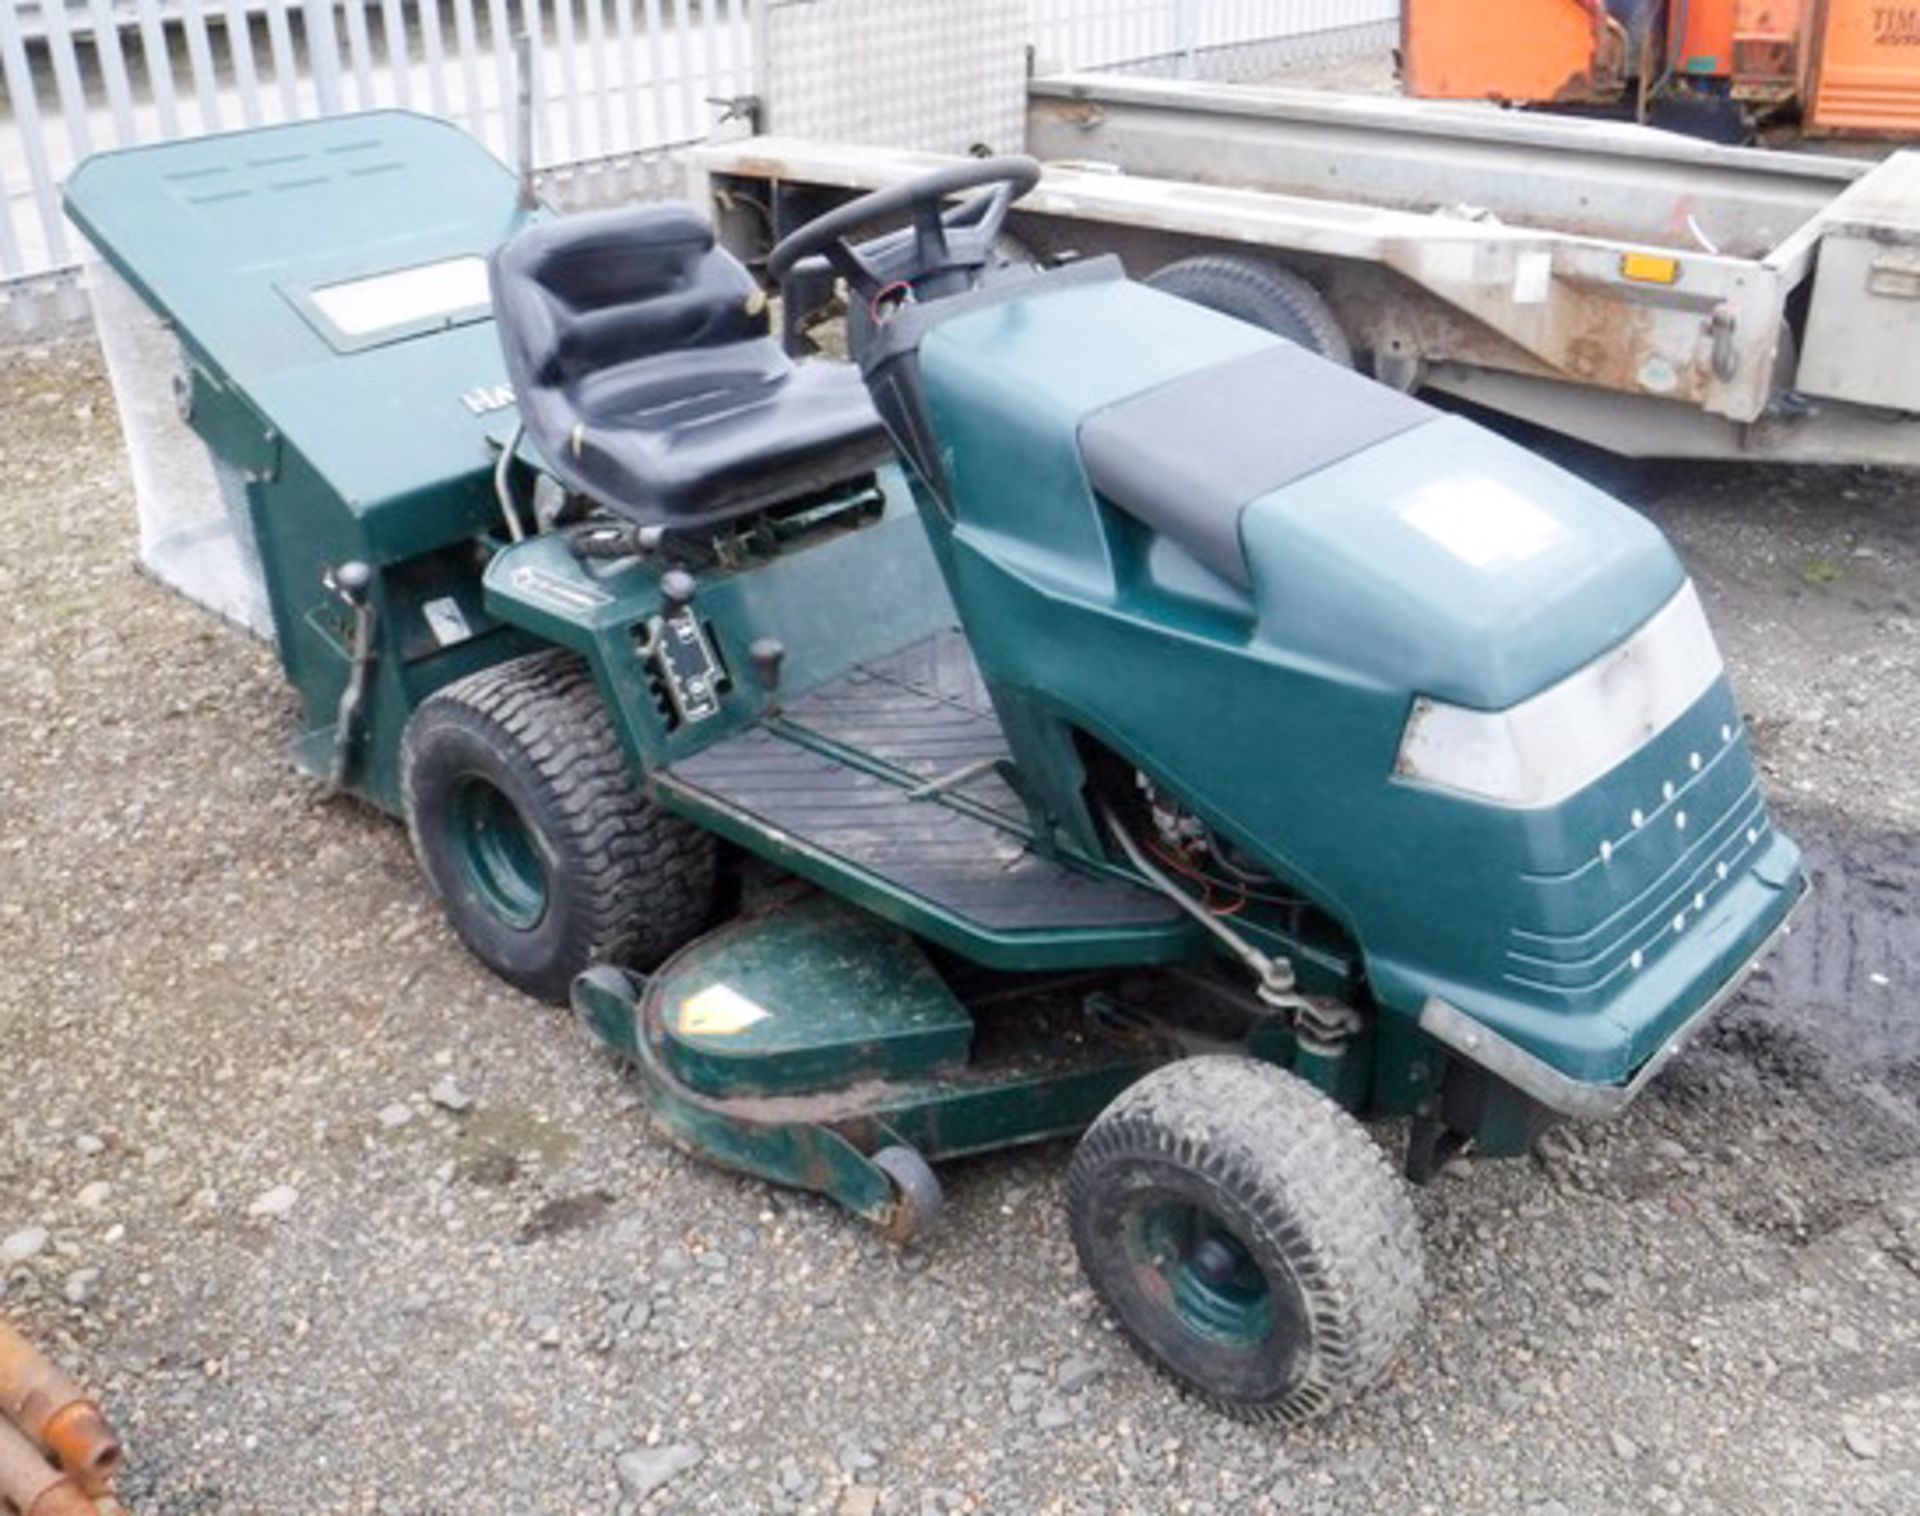 HAYTER H1842 RIDE ON MOWER 18 HP 42" CUT WITH SWEEPER & COLLECTION BOX/BASKET - Image 3 of 6